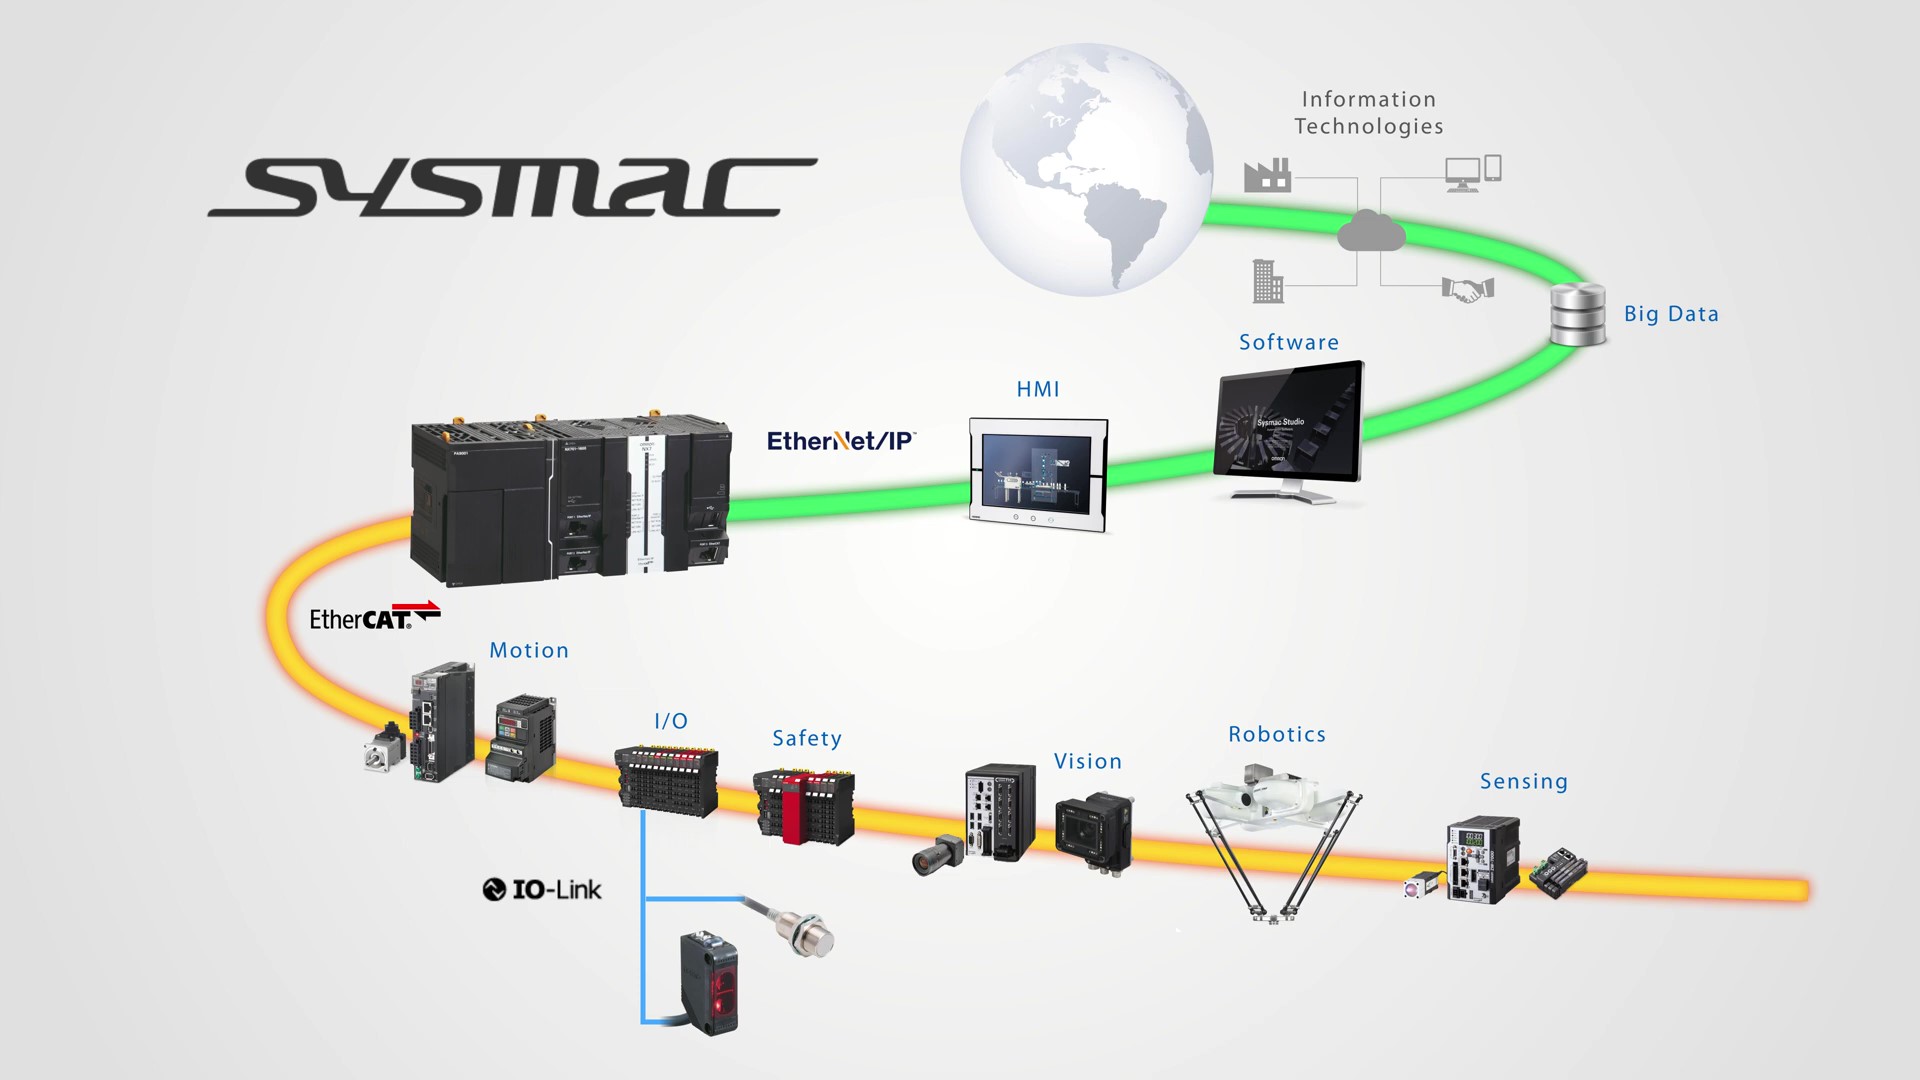 Omron's Sysmac Industrial Automation Platform